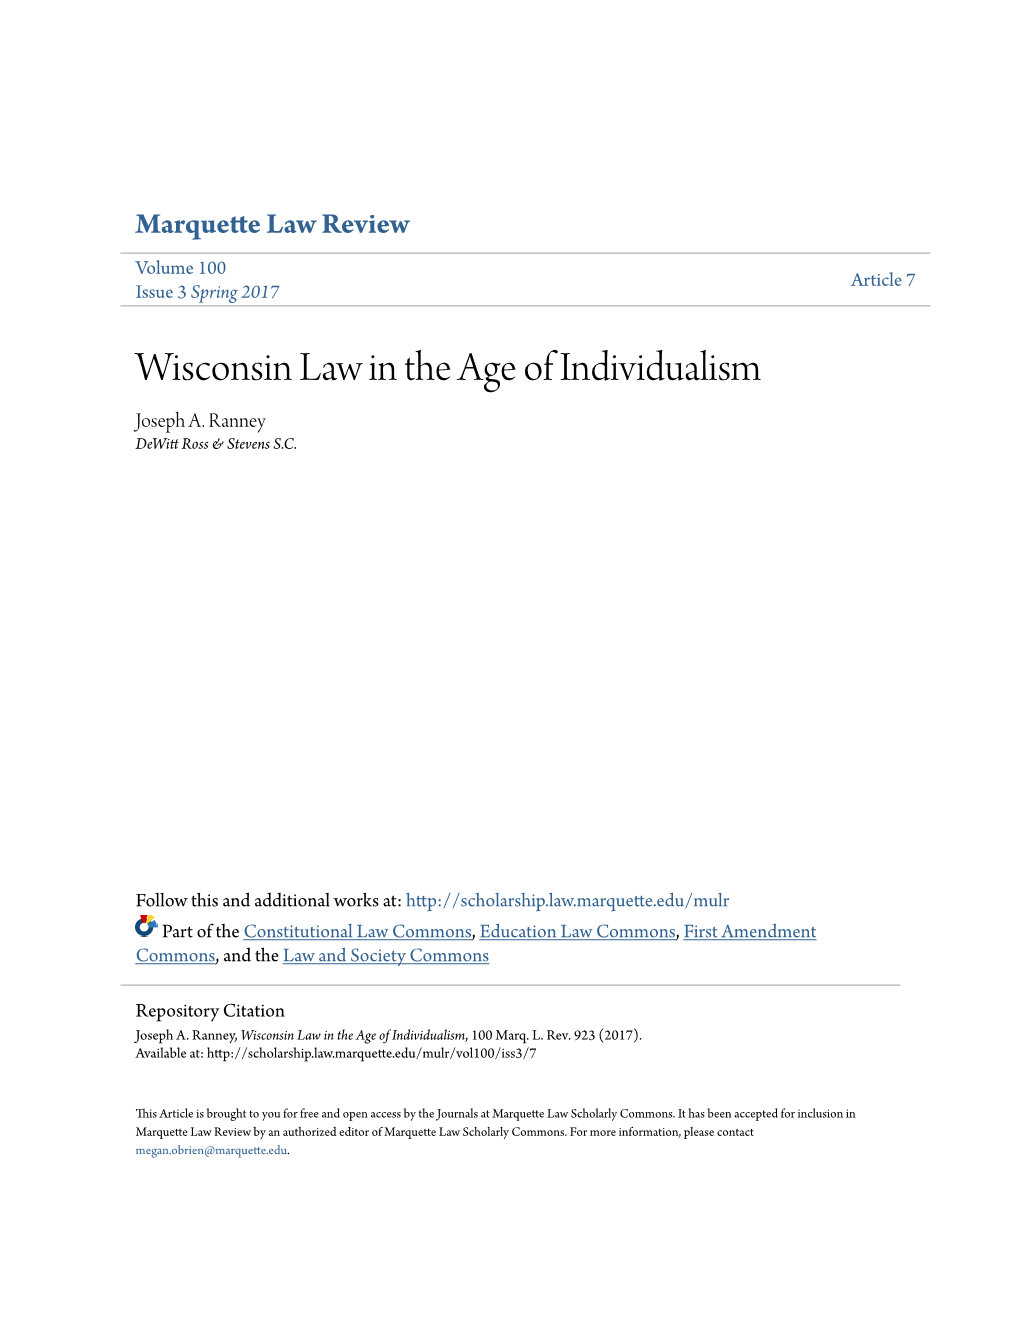 Wisconsin Law in the Age of Individualism Joseph A